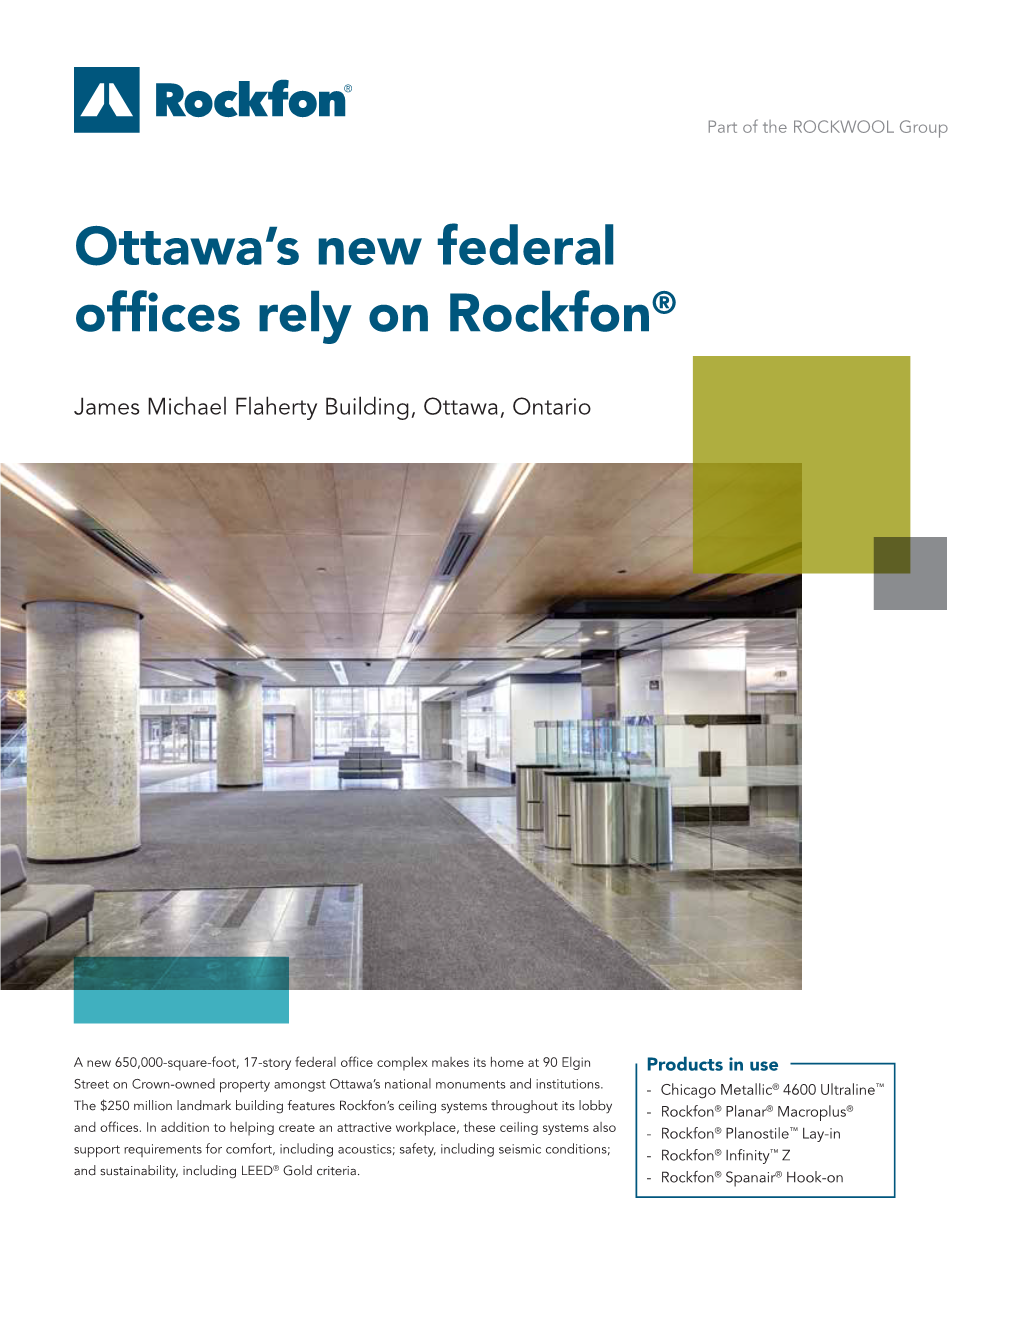 Rockfon-LEED, GREENGUARD Gold, Specialty Metal-Government Of